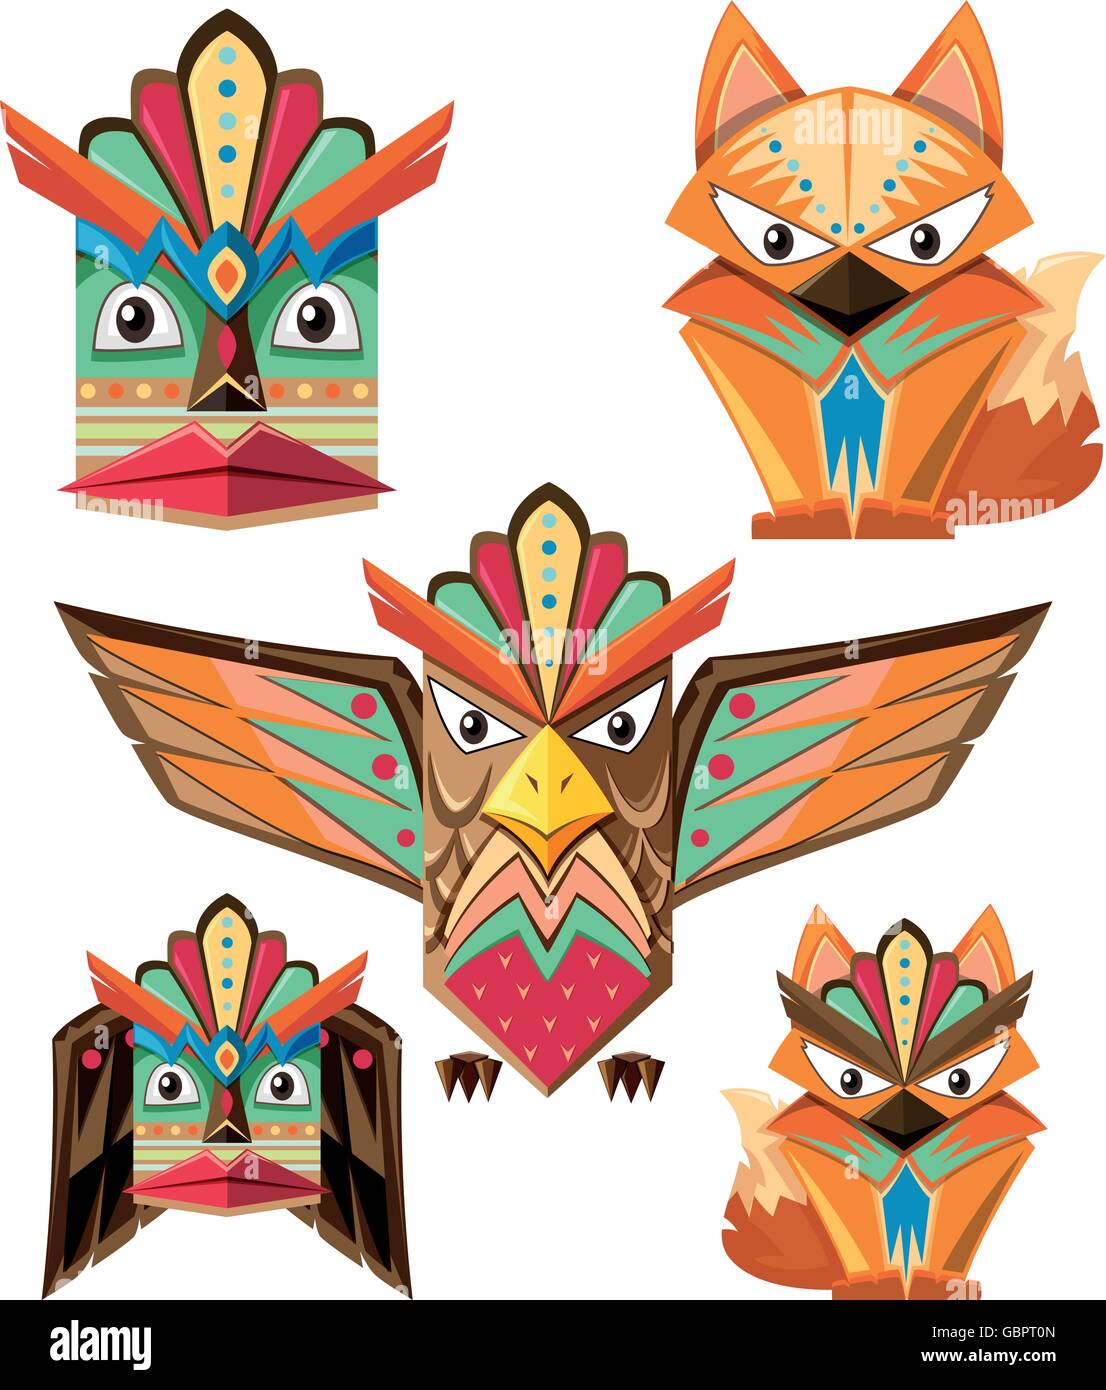 Totem animals Cut Out Stock Images & Pictures - Alamy